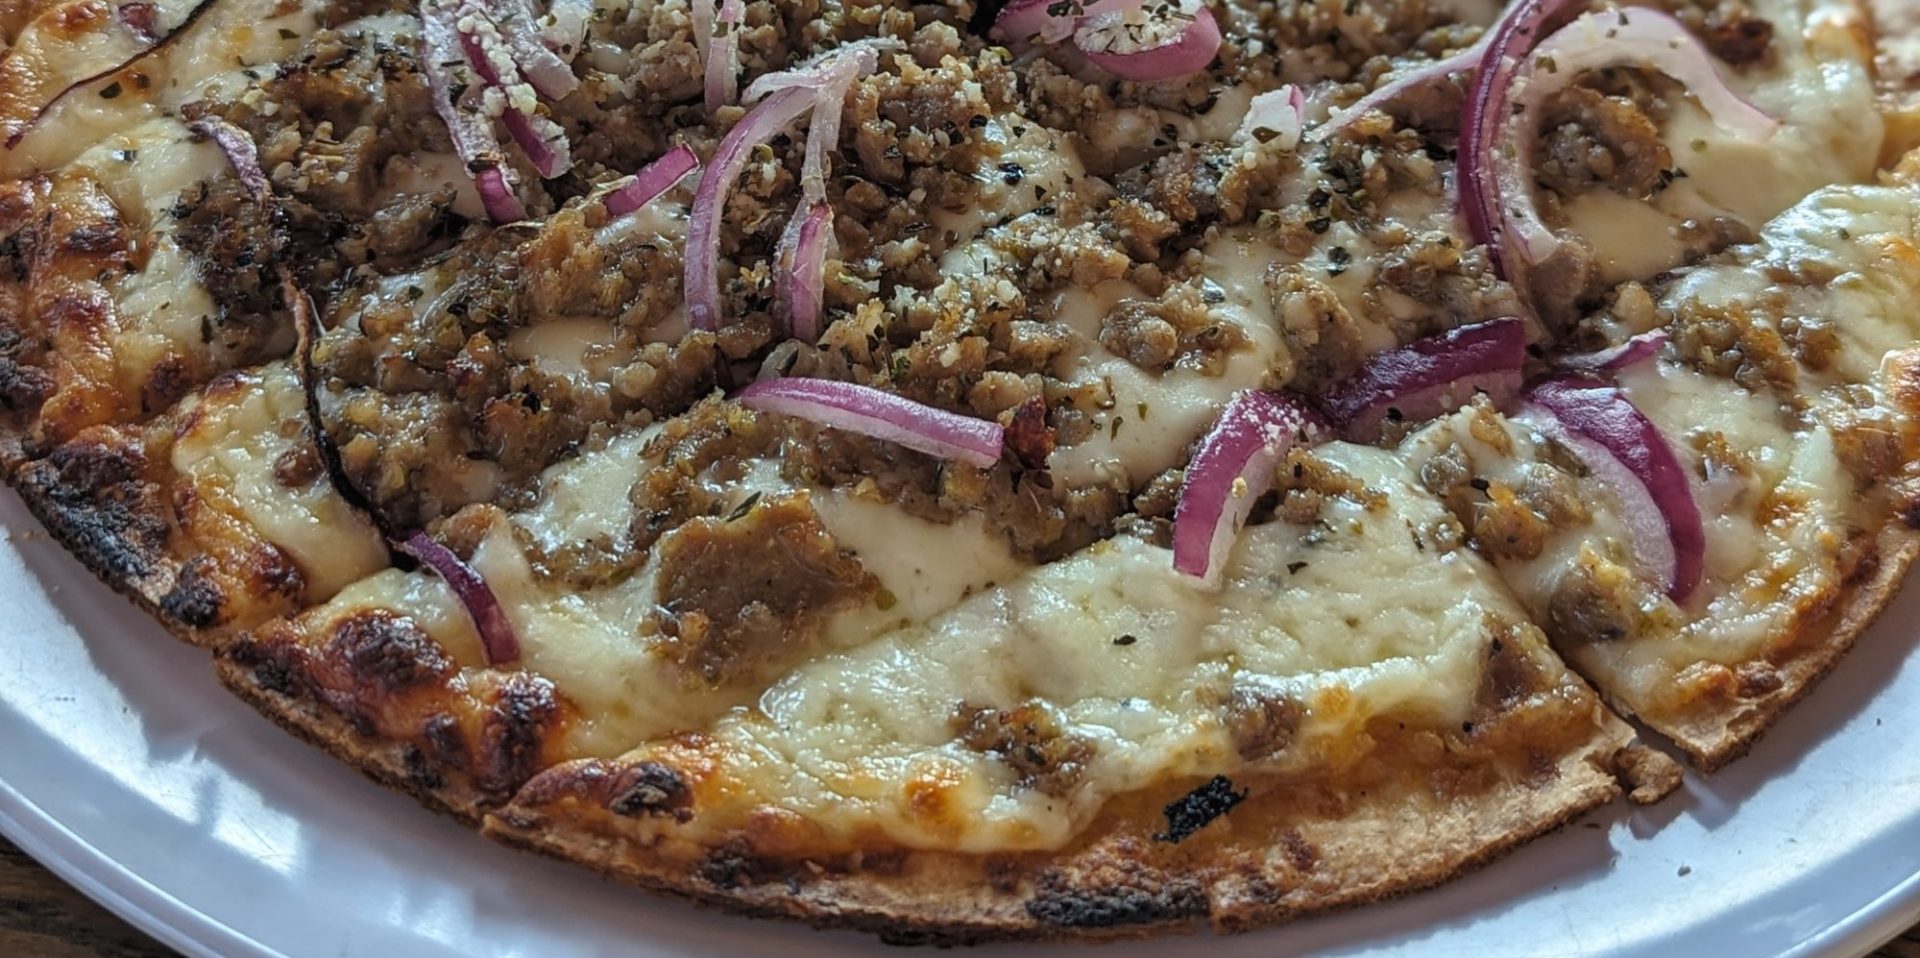 A flat pizza on a white plate with melty cheese covered in small pieces of sausage and slices of red onion.